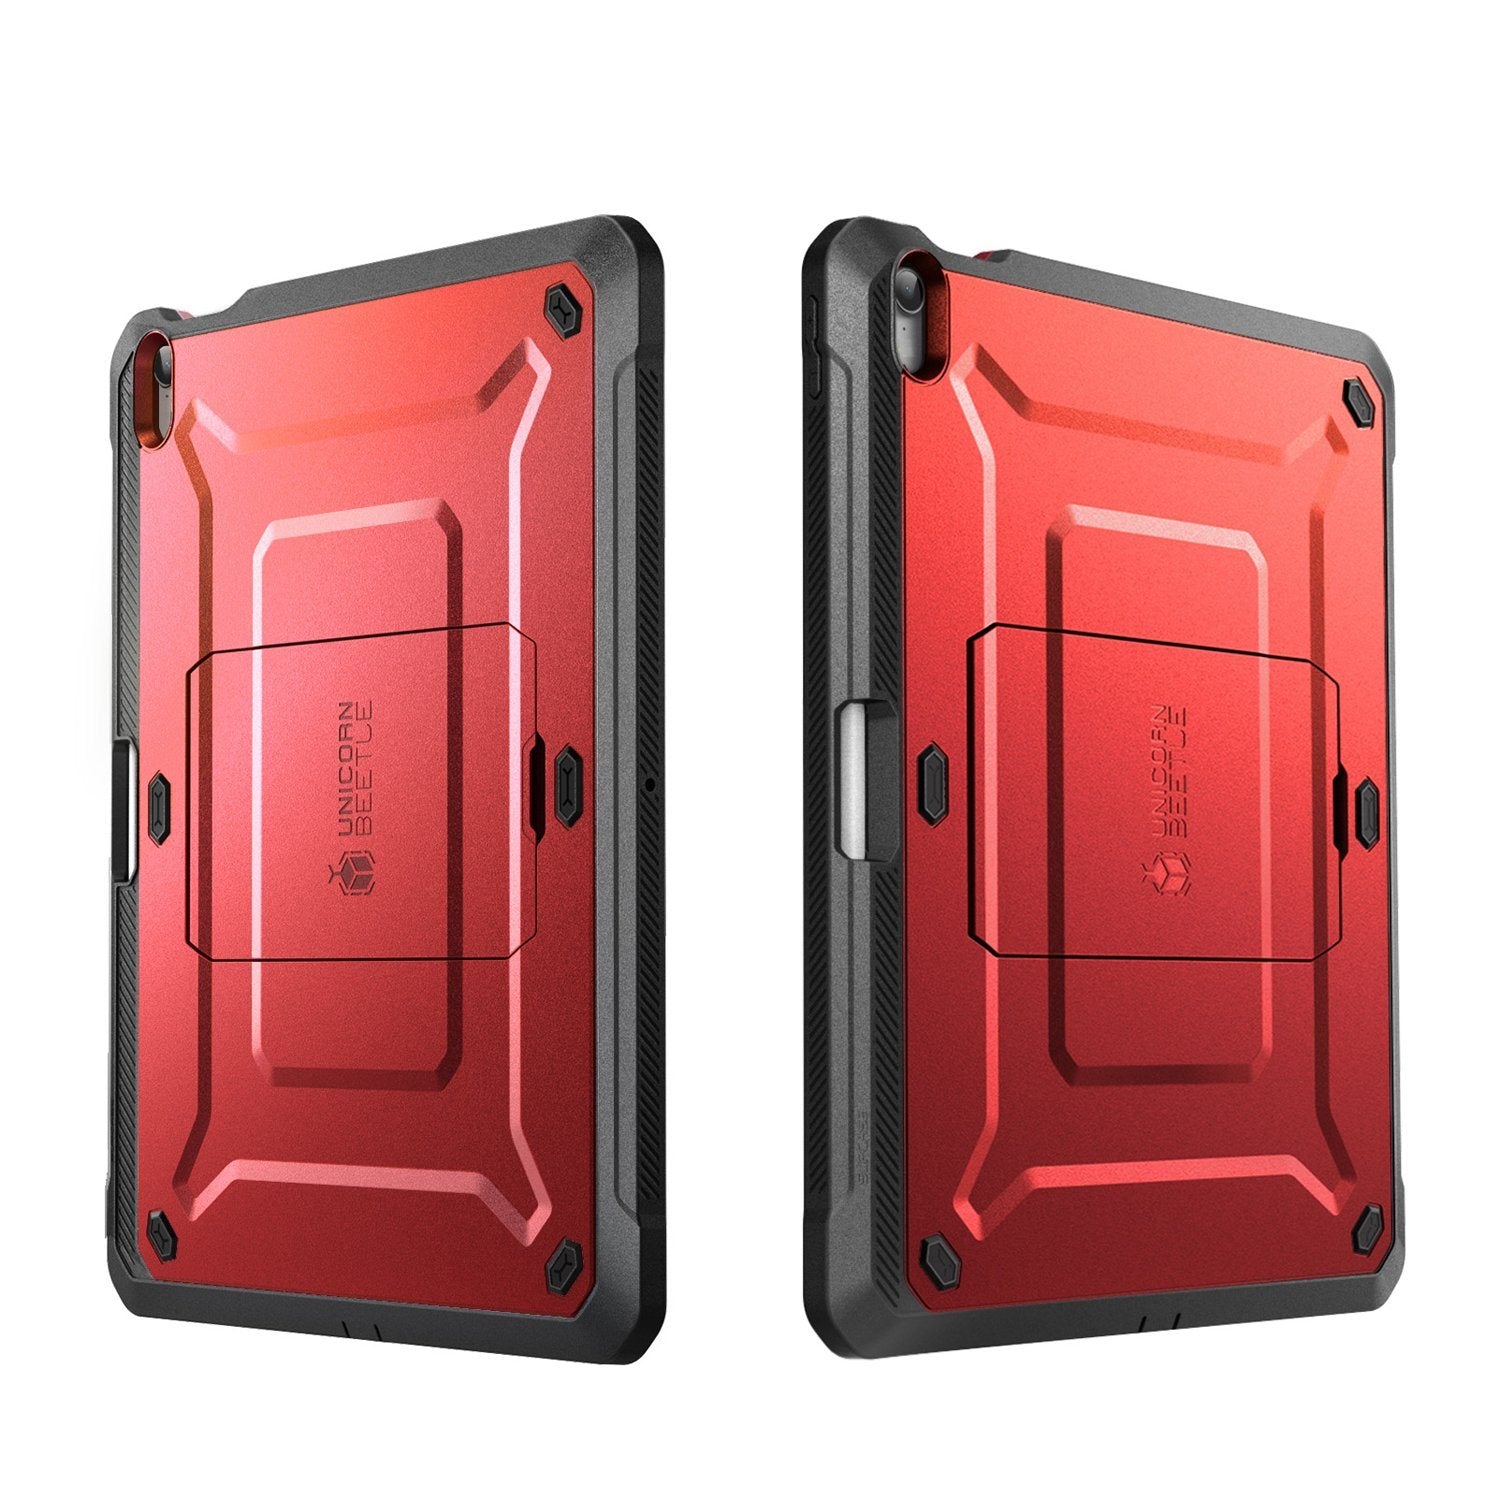 Supcase UB Pro Series Full-Body Rugged Case with Kickstand for iPad Air 4 Generation 10.9"(2020), Ruddy Default Supcase 